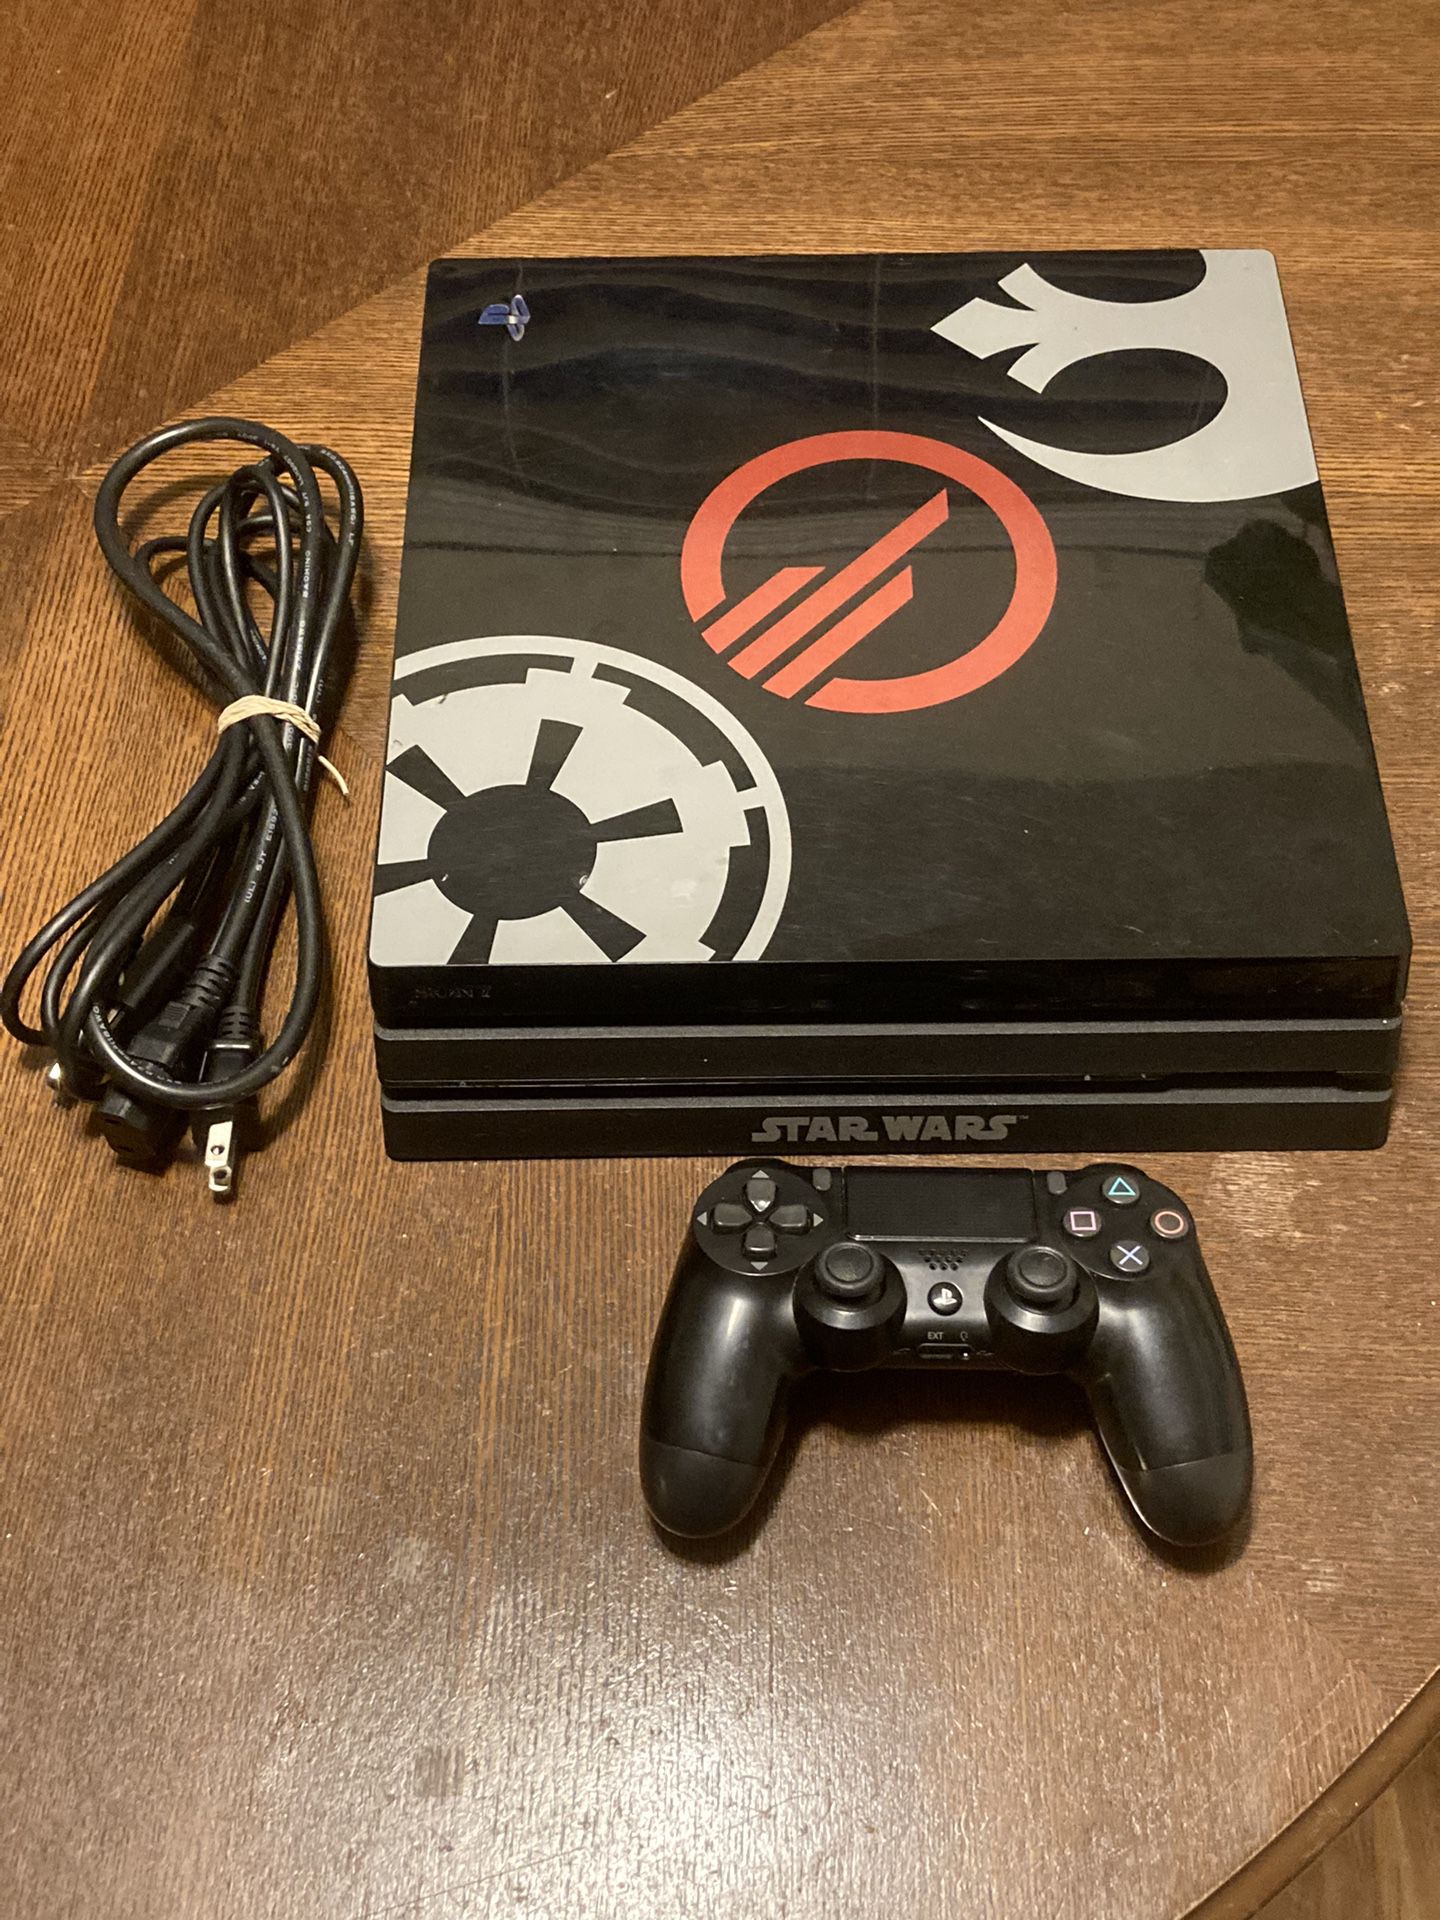 Star Wars Battlefront Limited Edition PS4 